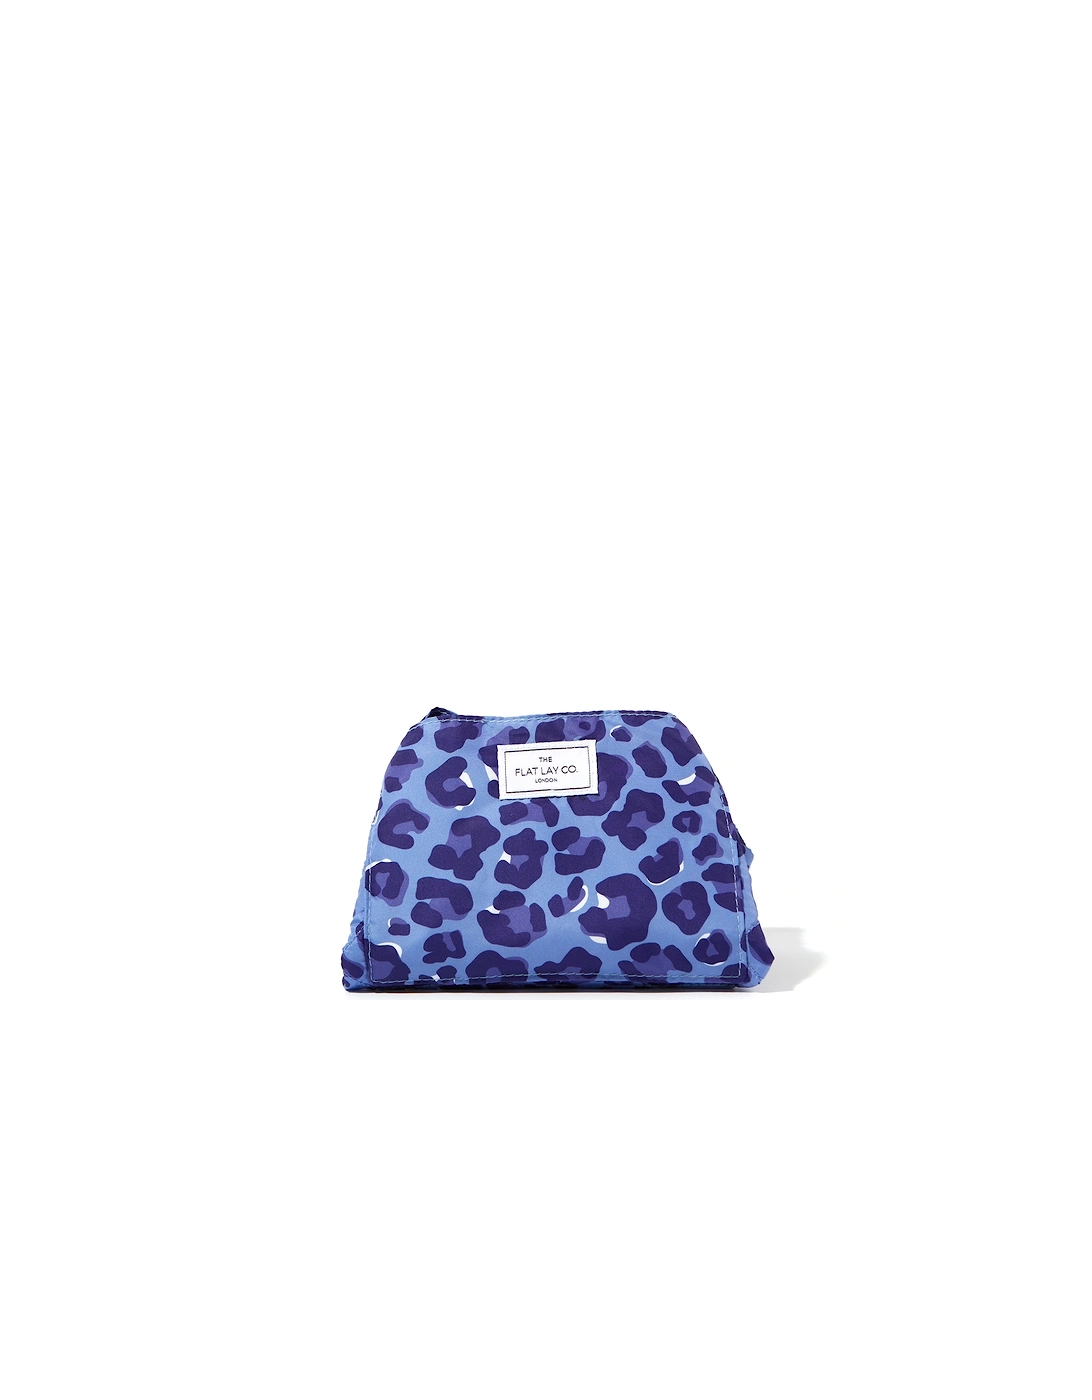 The Flat Lay Co. Drawstring Makeup Bag - Blue Leopard, 2 of 1